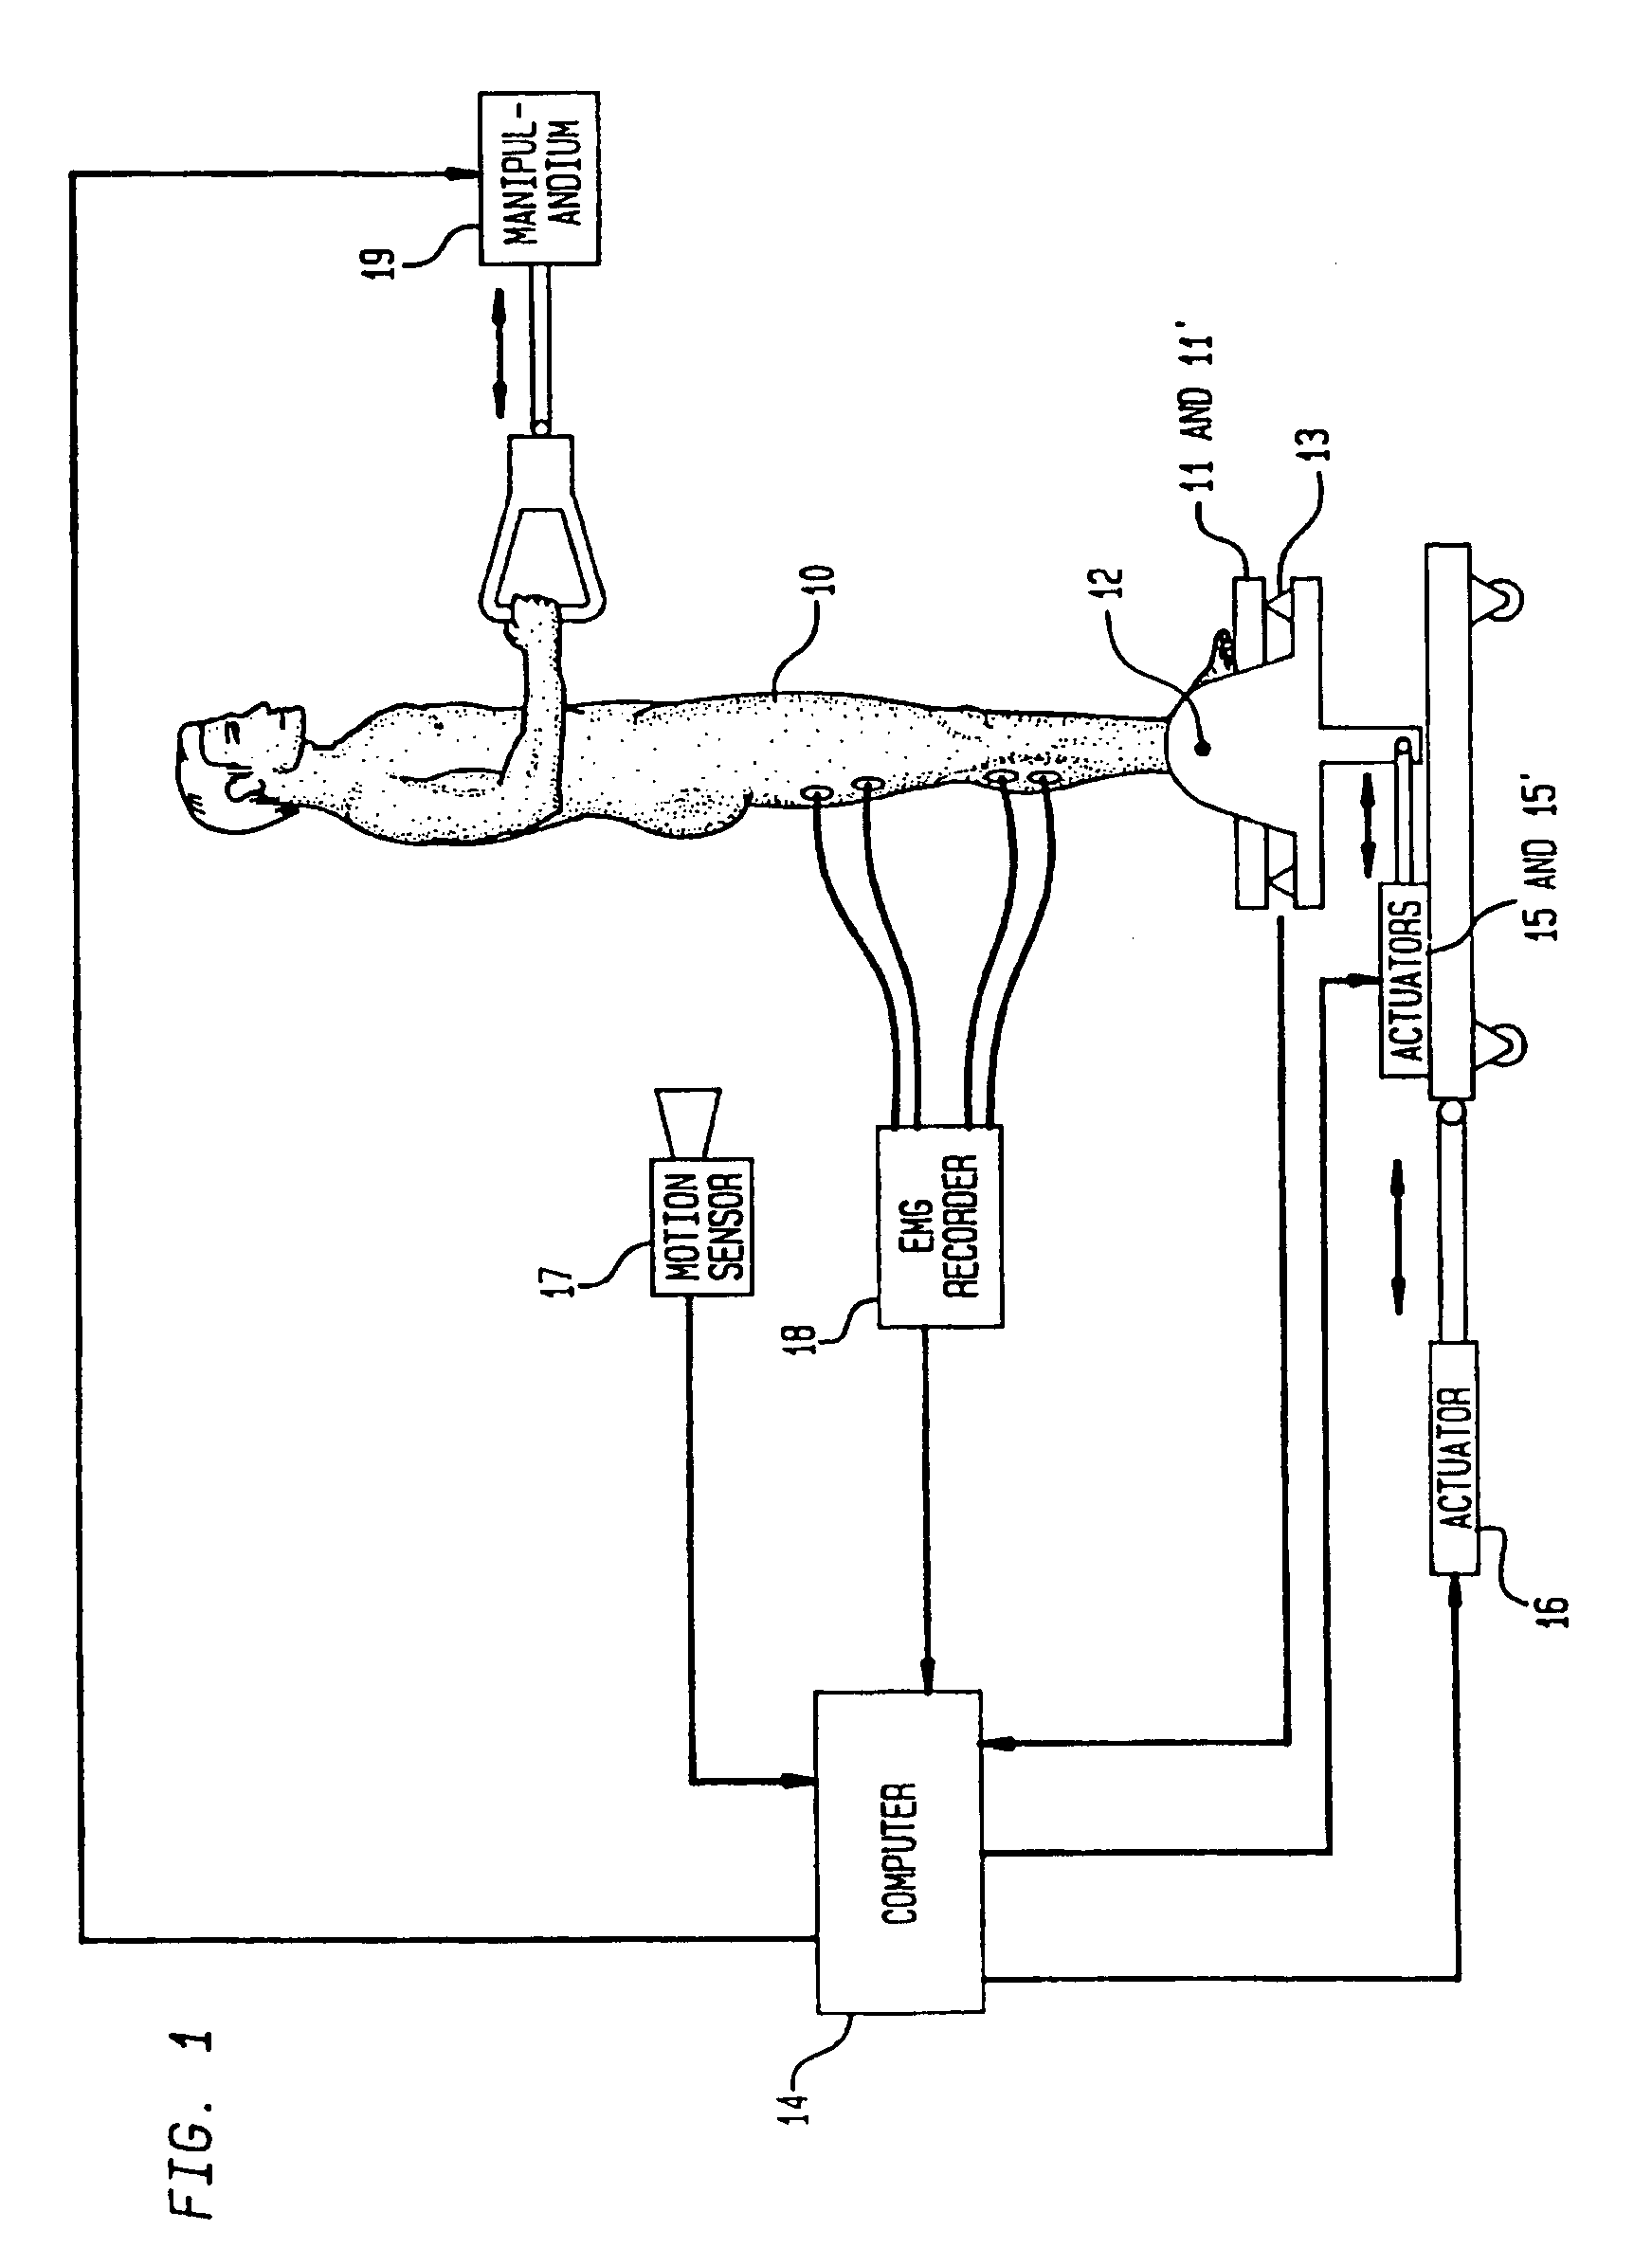 Apparatus and method for movement coordination analysis